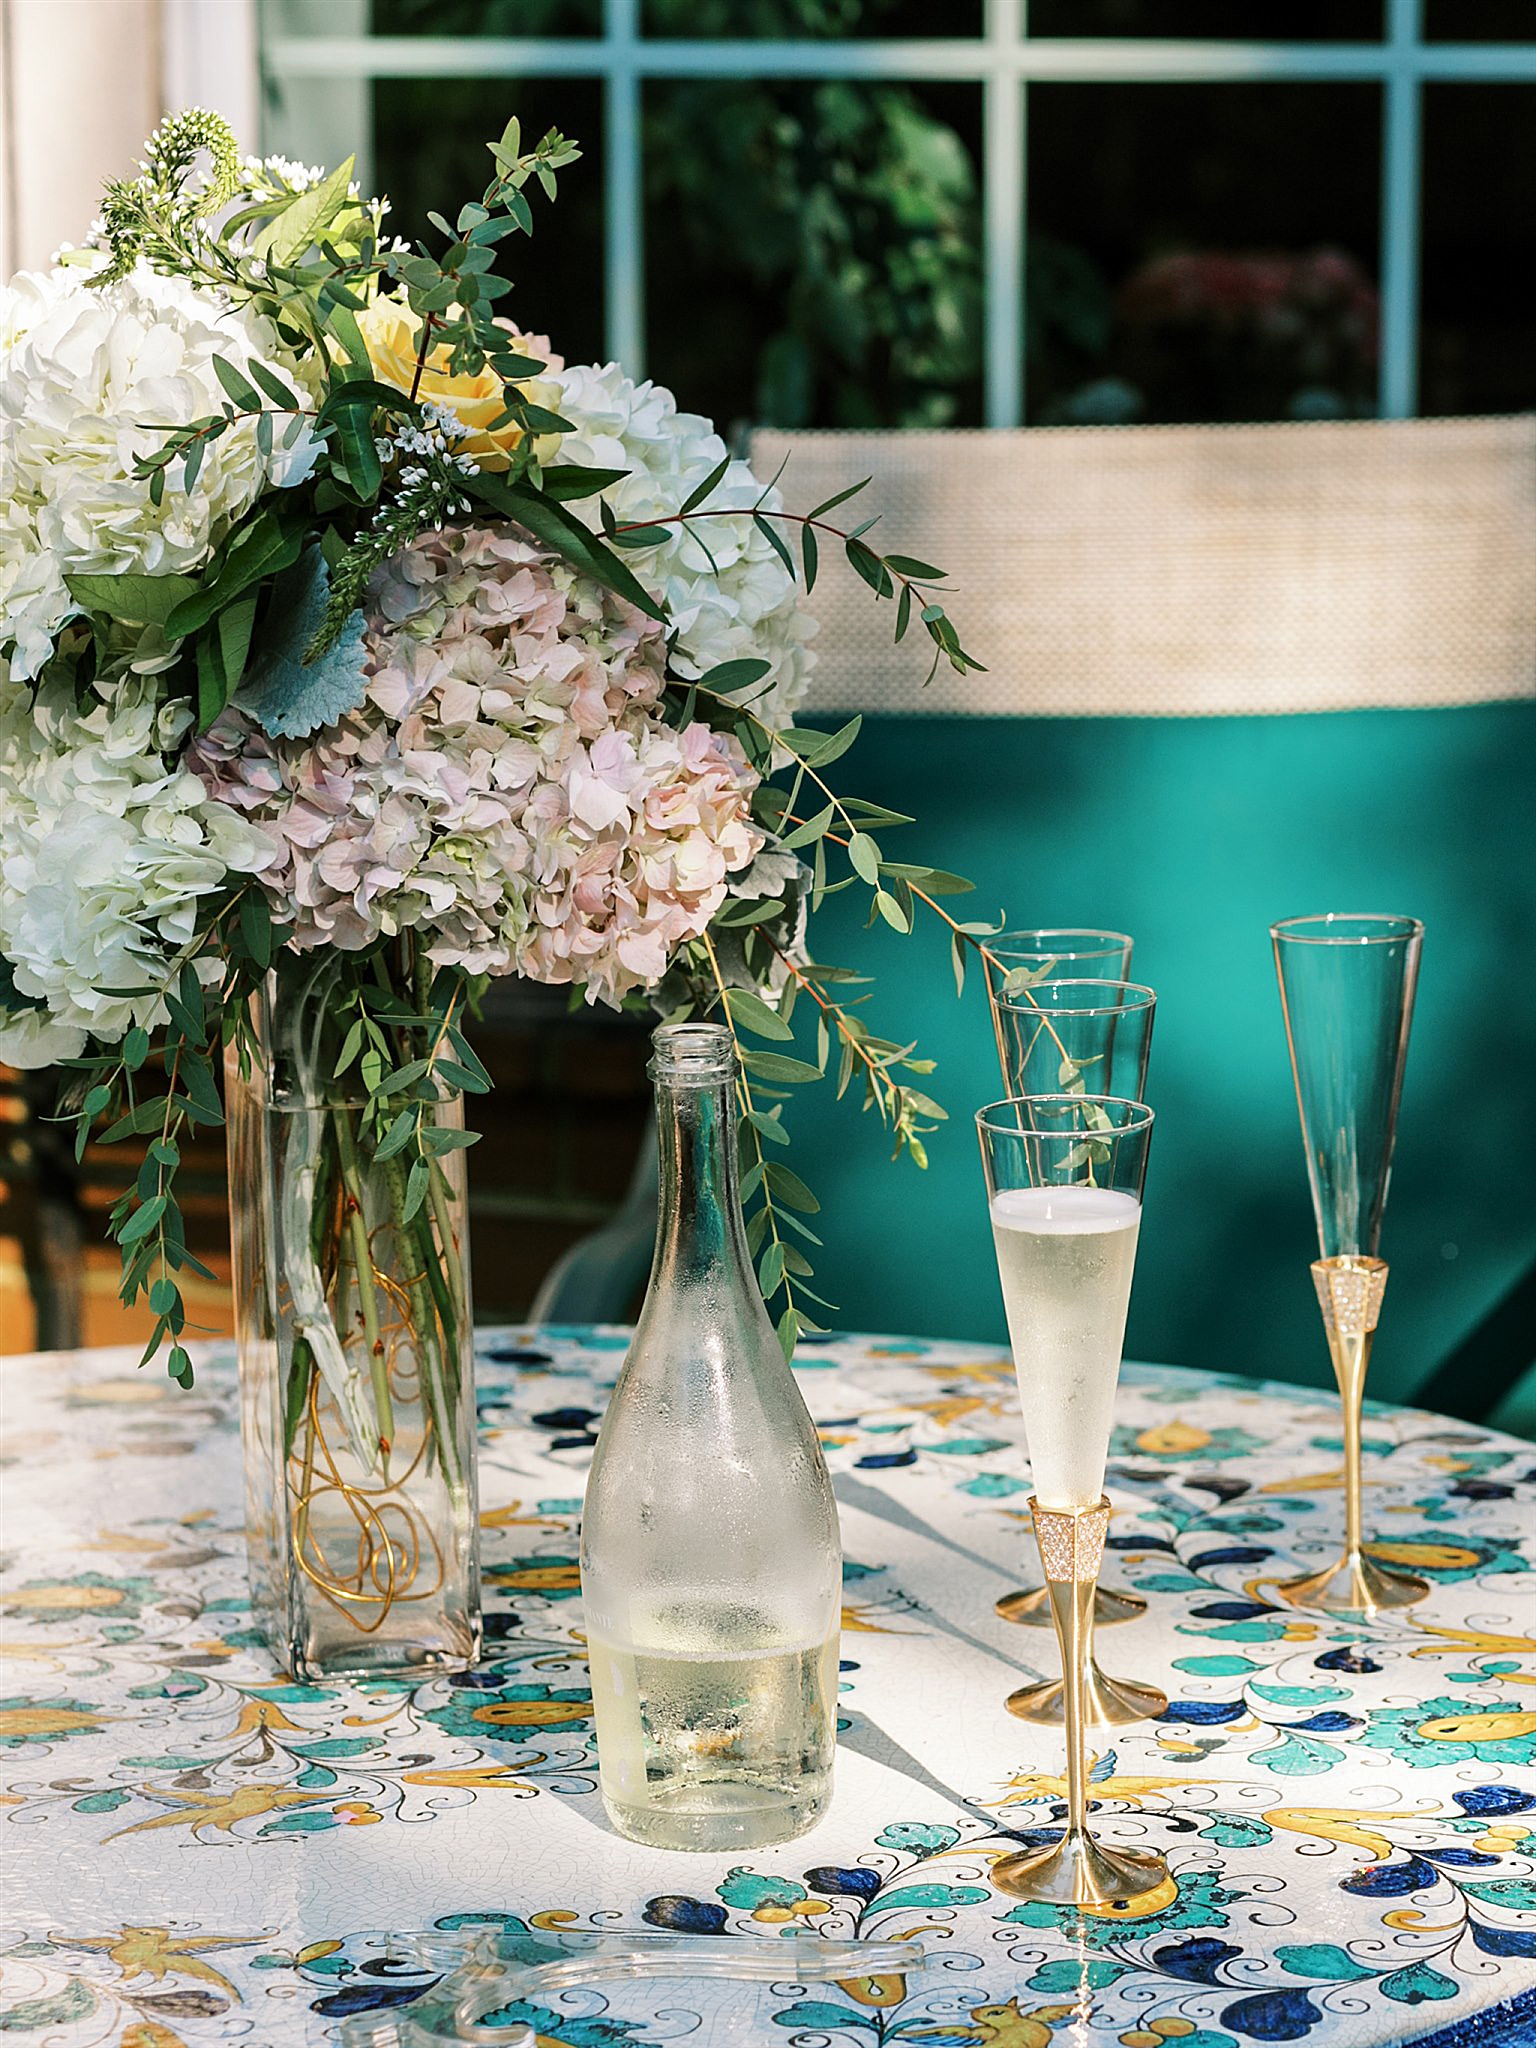 champagne and glasses for Intimate Wedding at Home